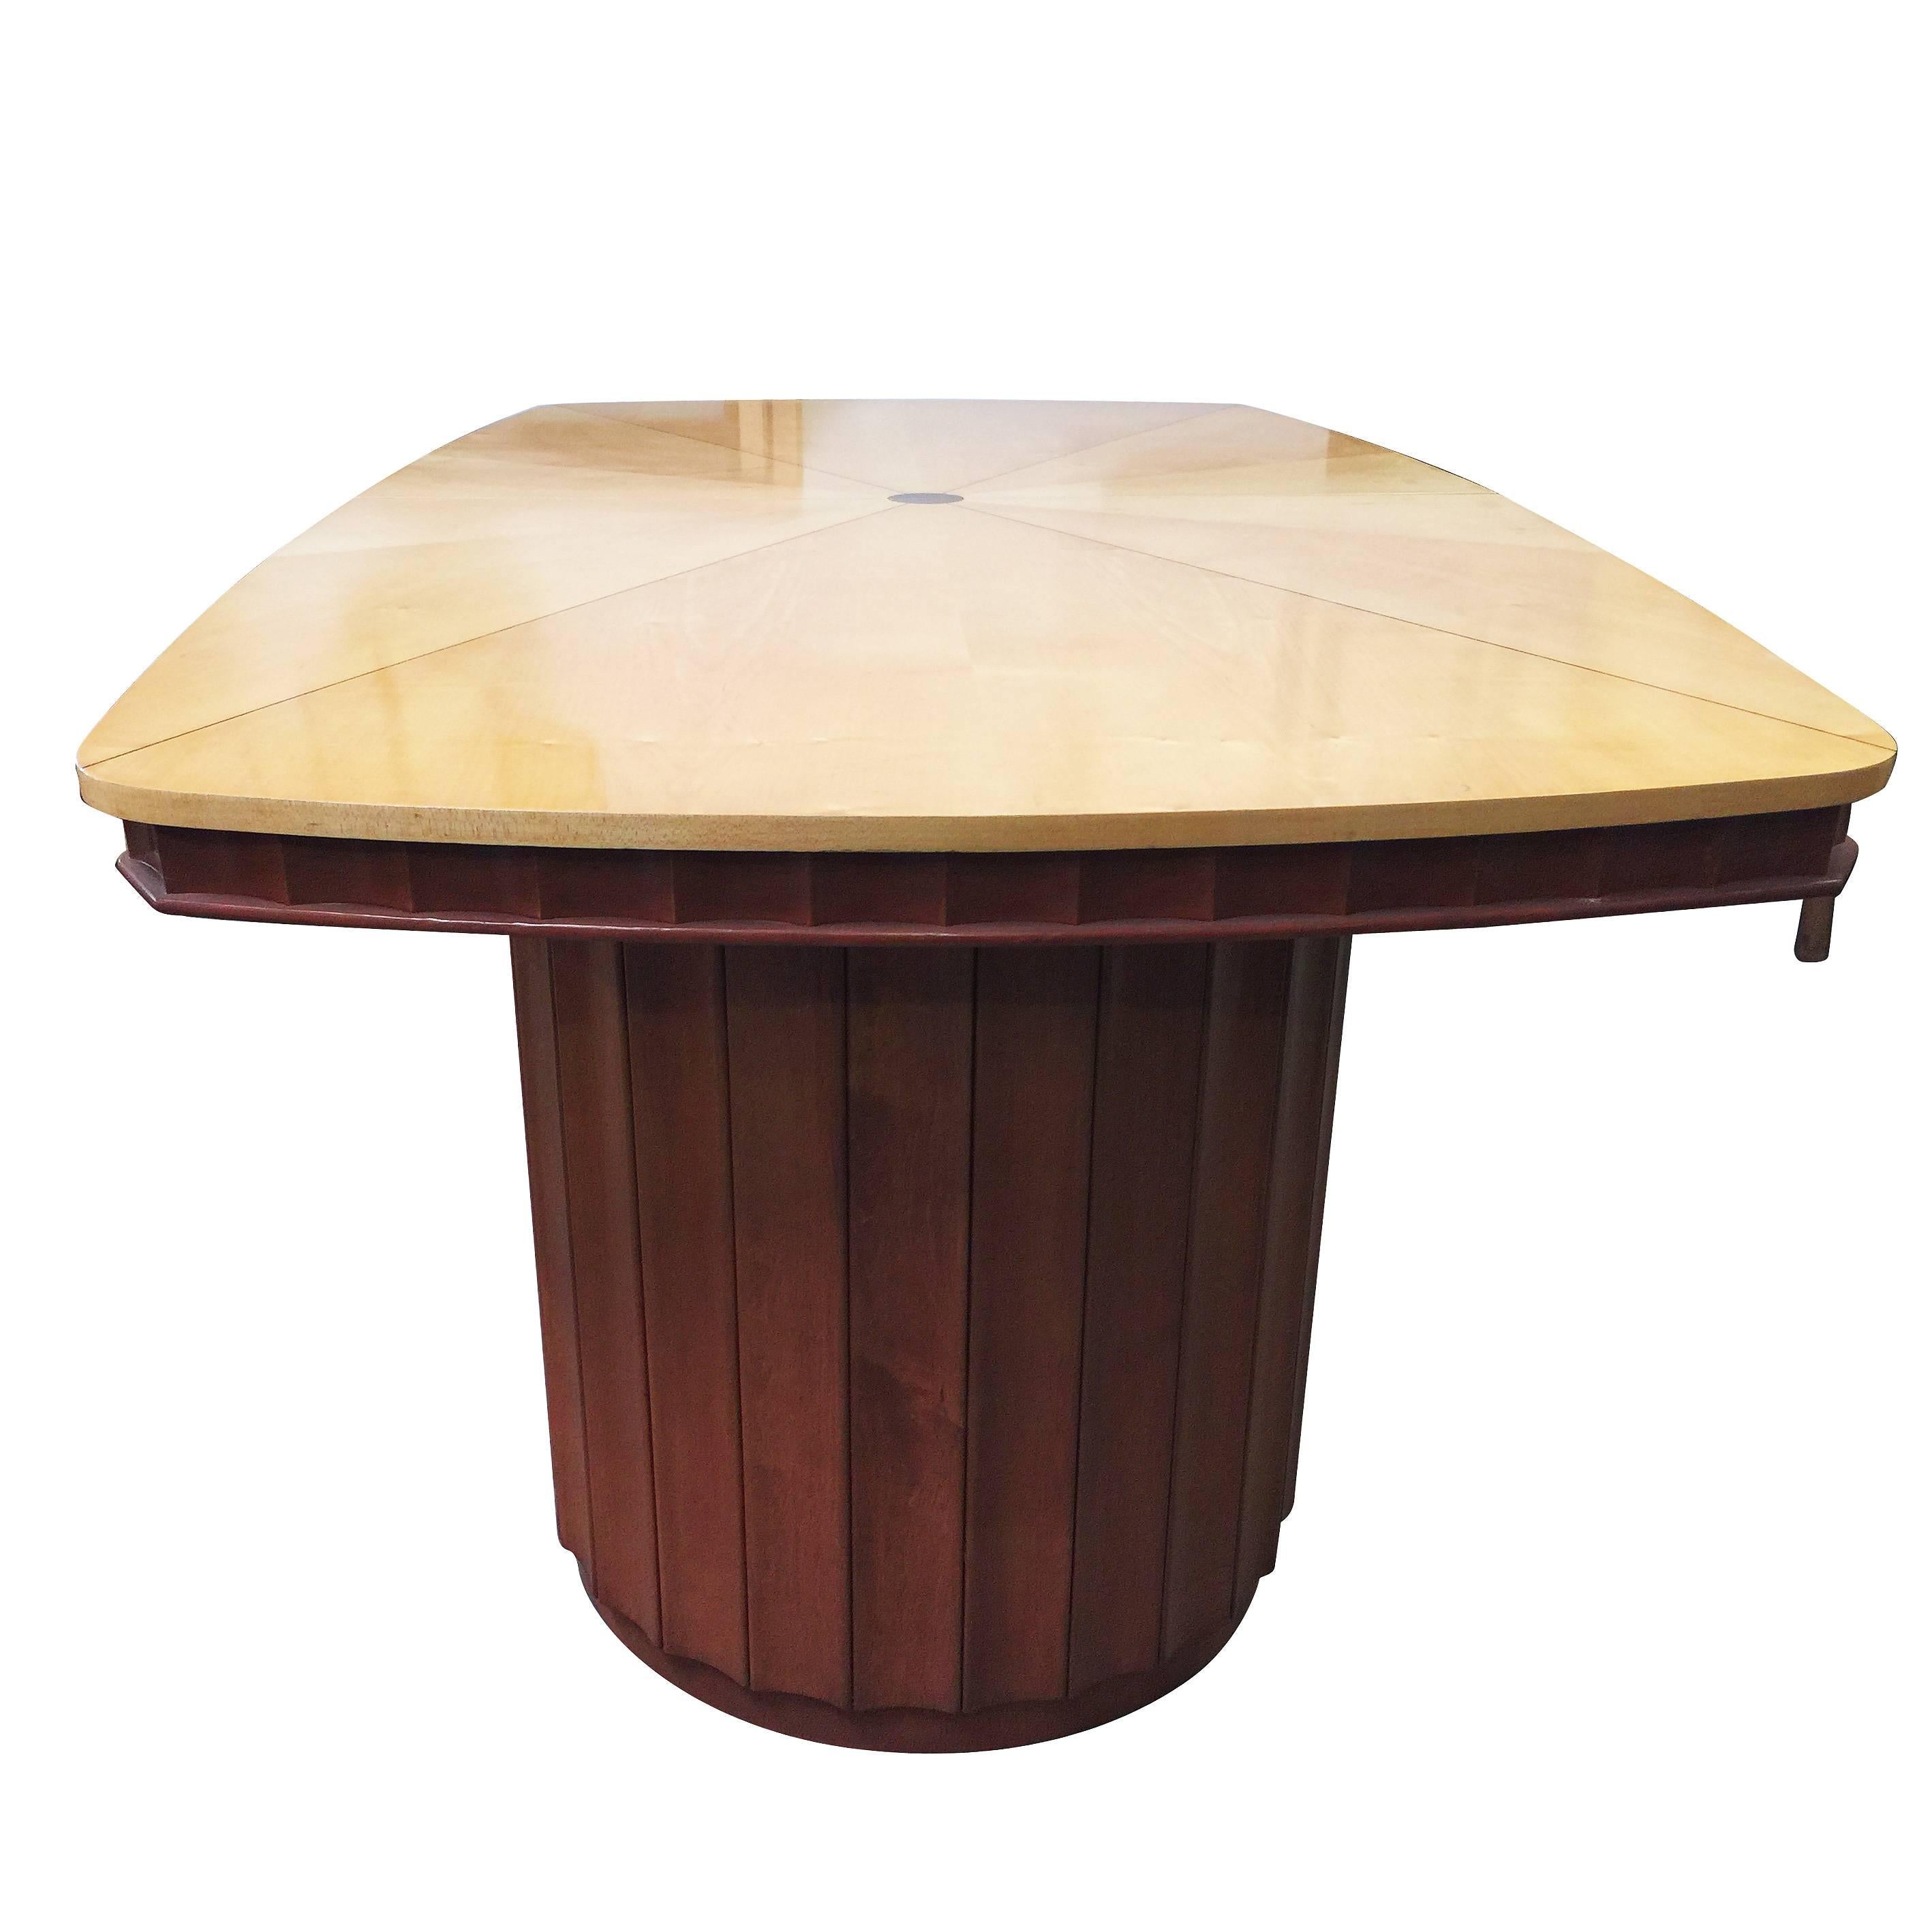 North American Eliel Saarinen Style Dining Table with Sculpted Bases and Inlay Top For Sale